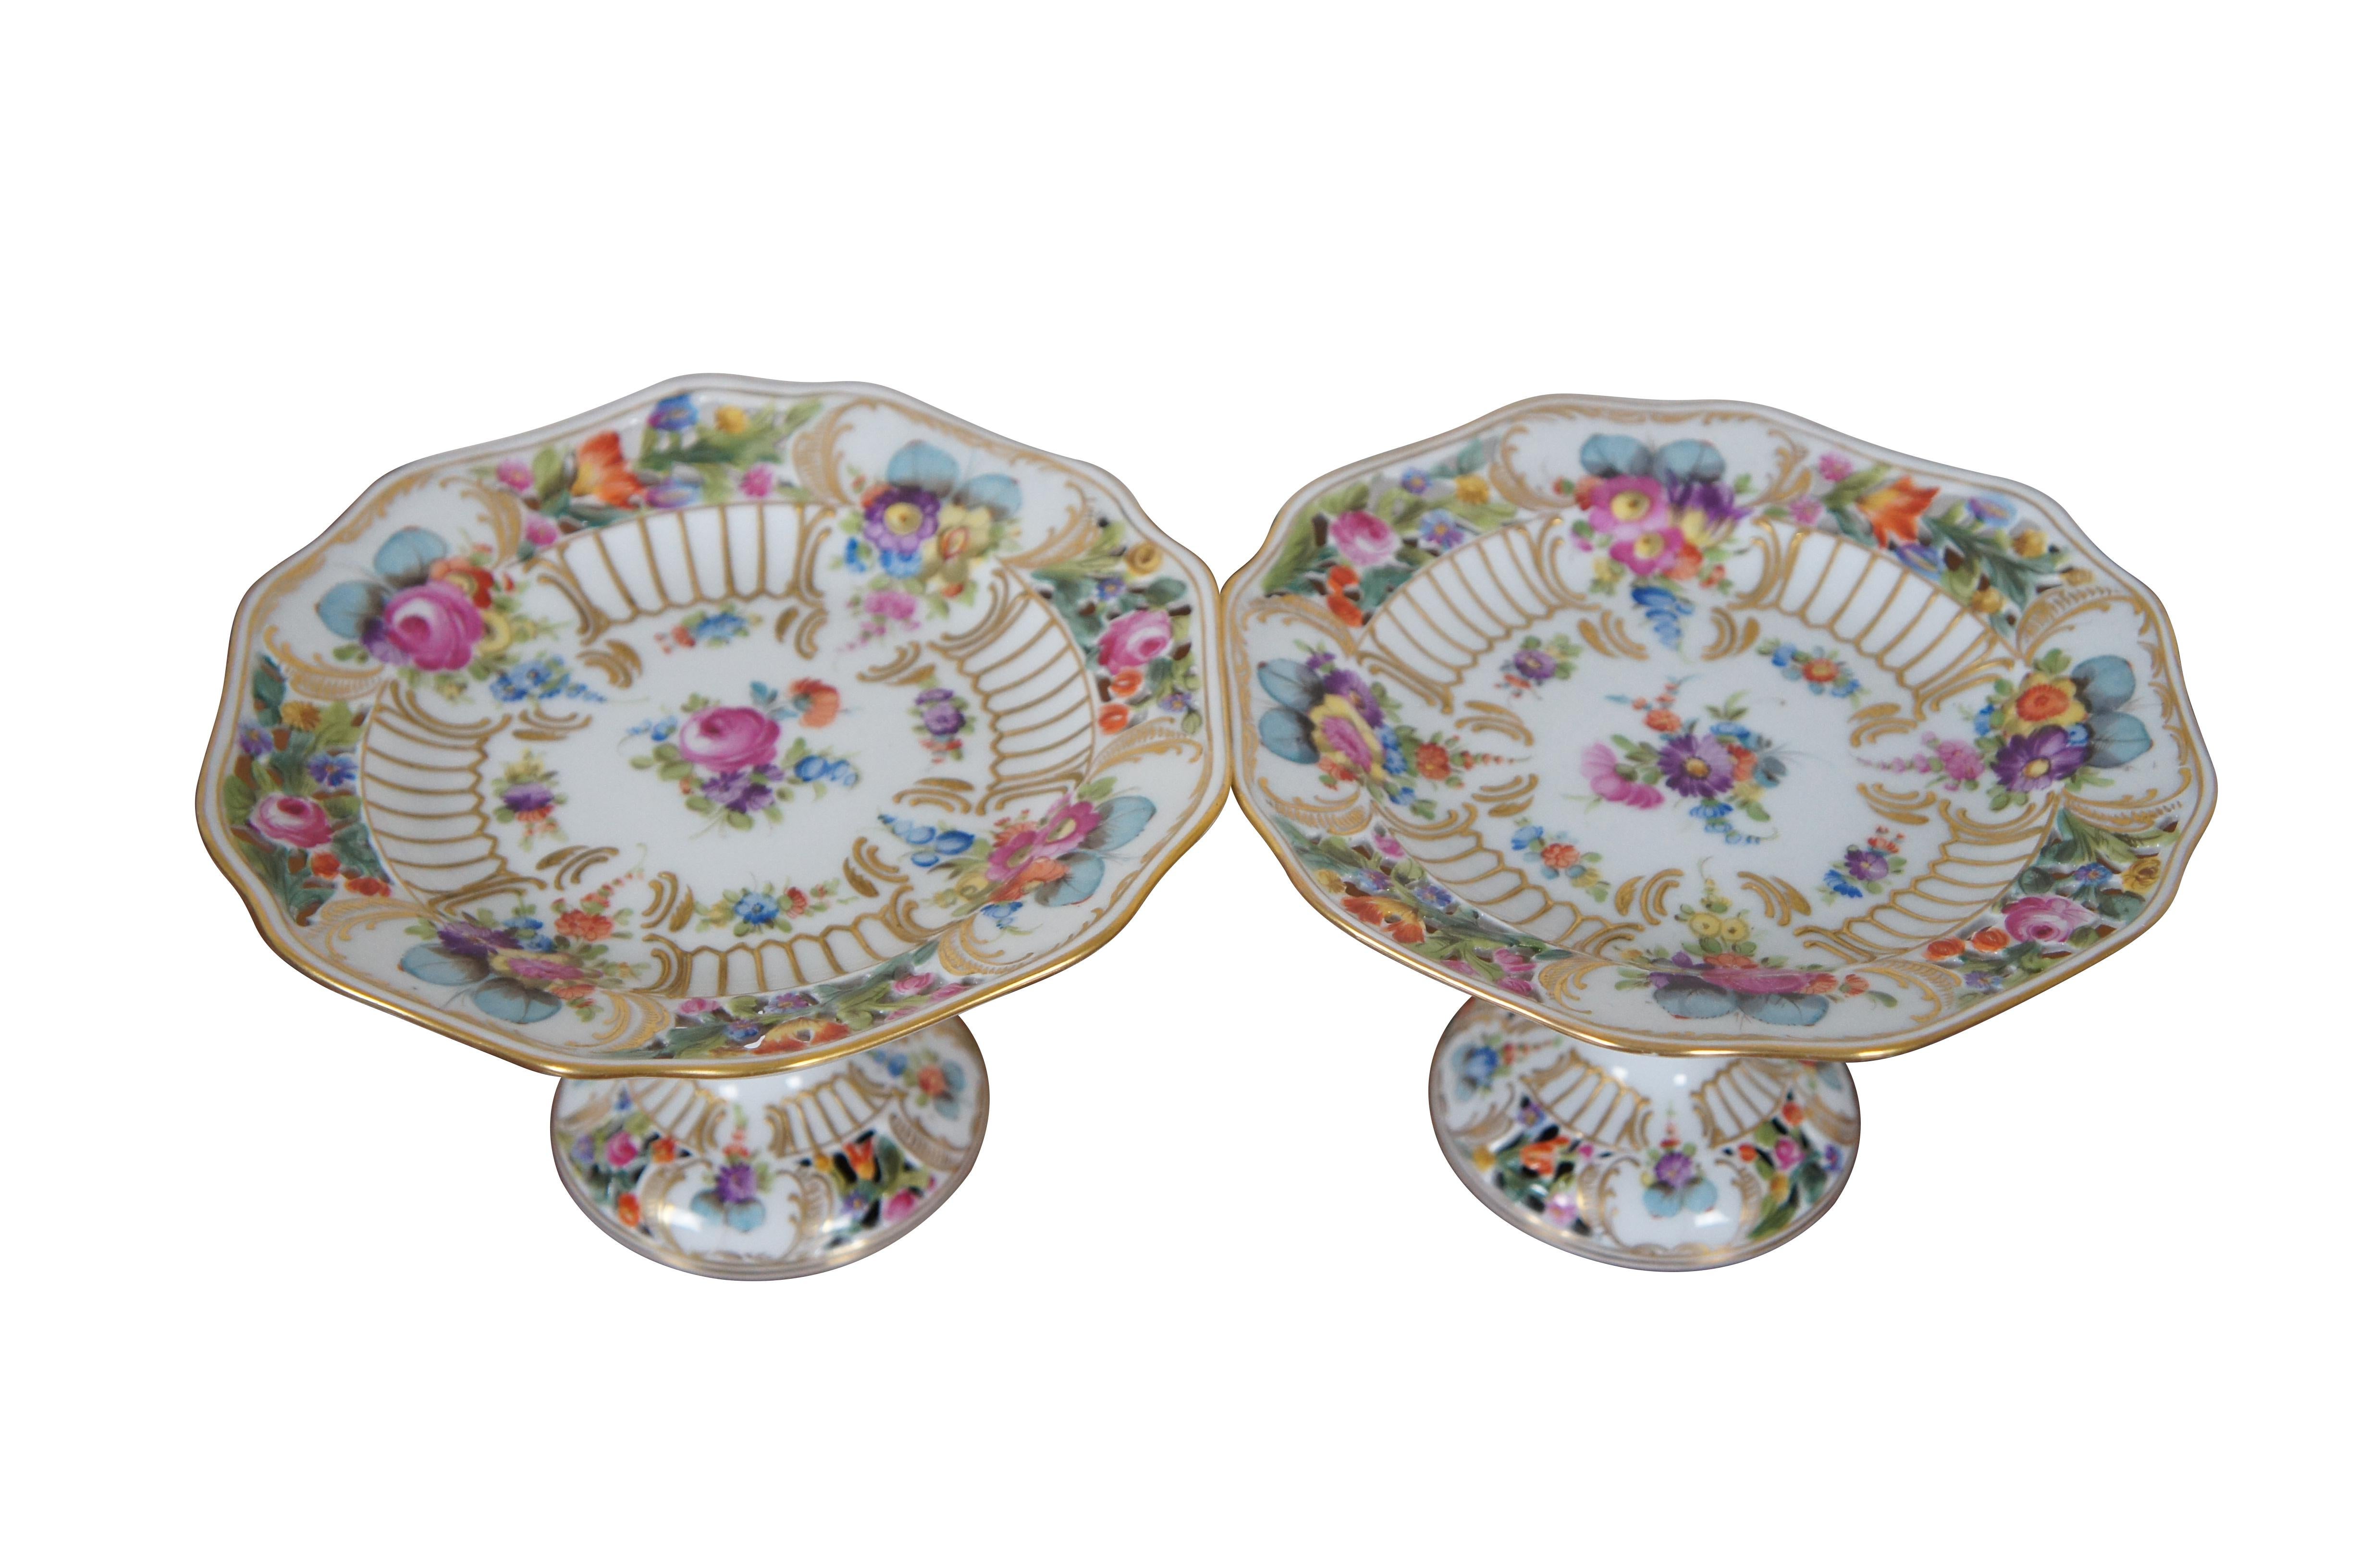 Pair of two antique German Dresden Carl Thieme porcelain compotes / cake / dessert plates / stands featuring a floral theme with scalloped form, pedestal base and reticulated / pierced accents.  Marked Dec: 300. Depose.  Cirac 1902-1920.

“The